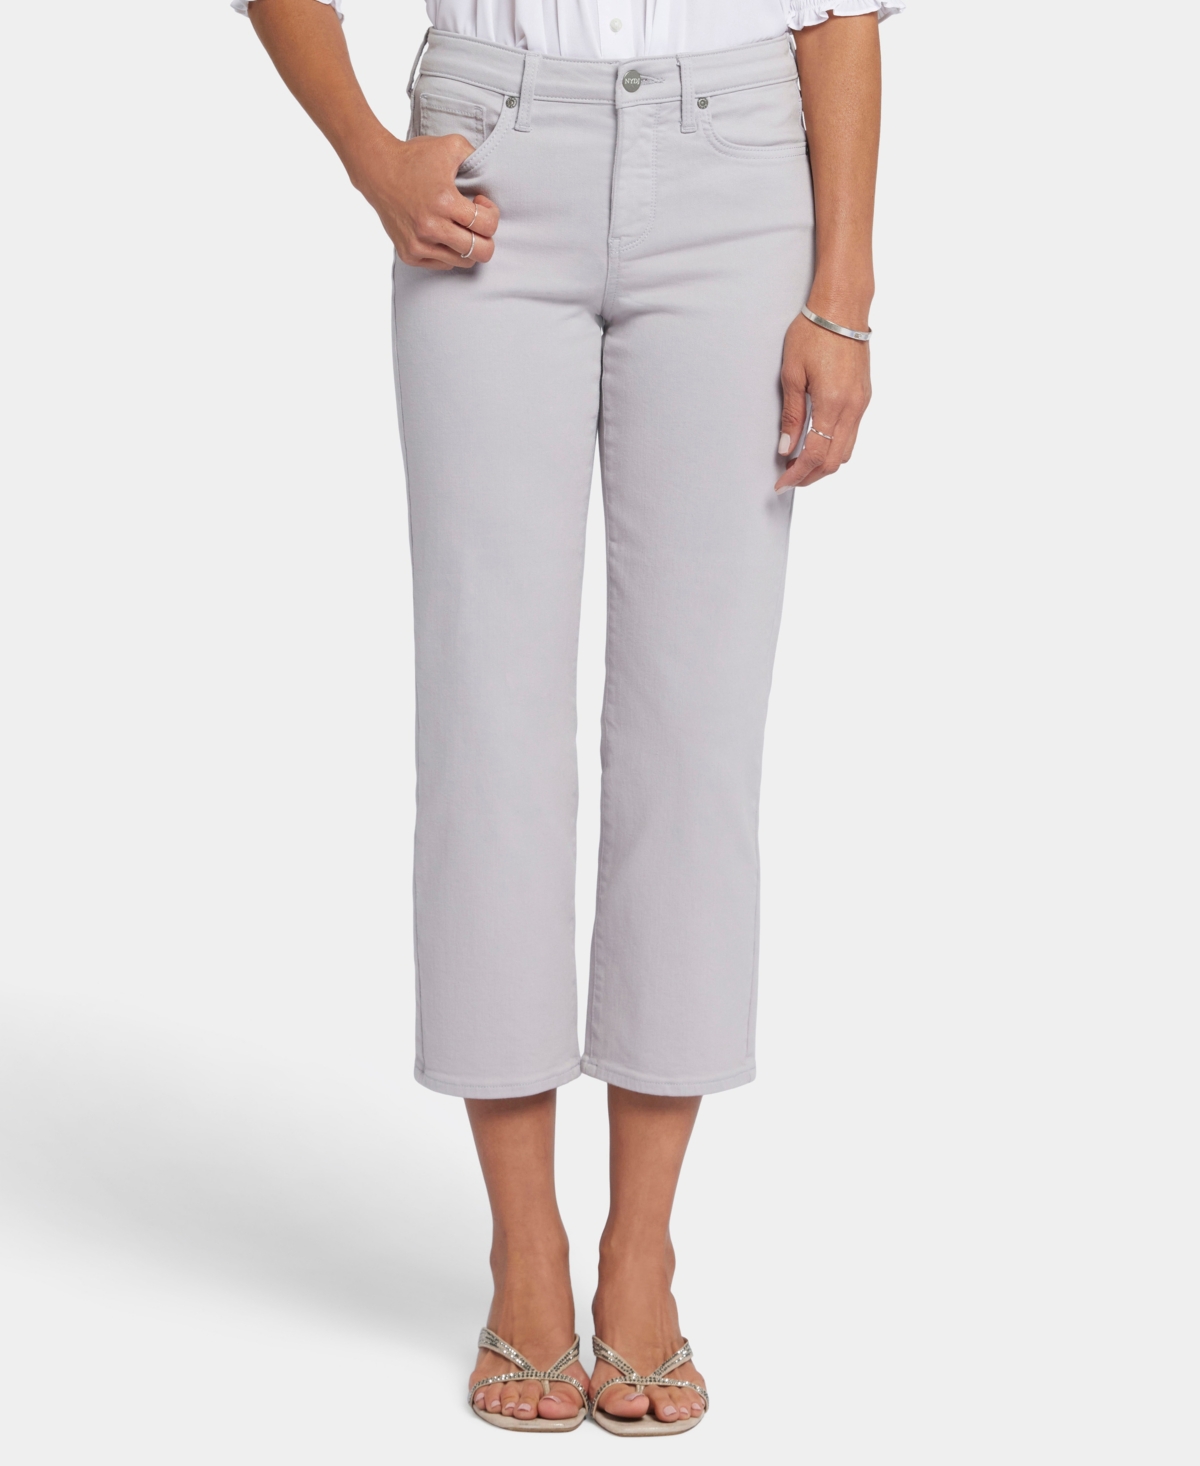 Nydj's Relaxed Piper Crop Jeans - Pearl Grey